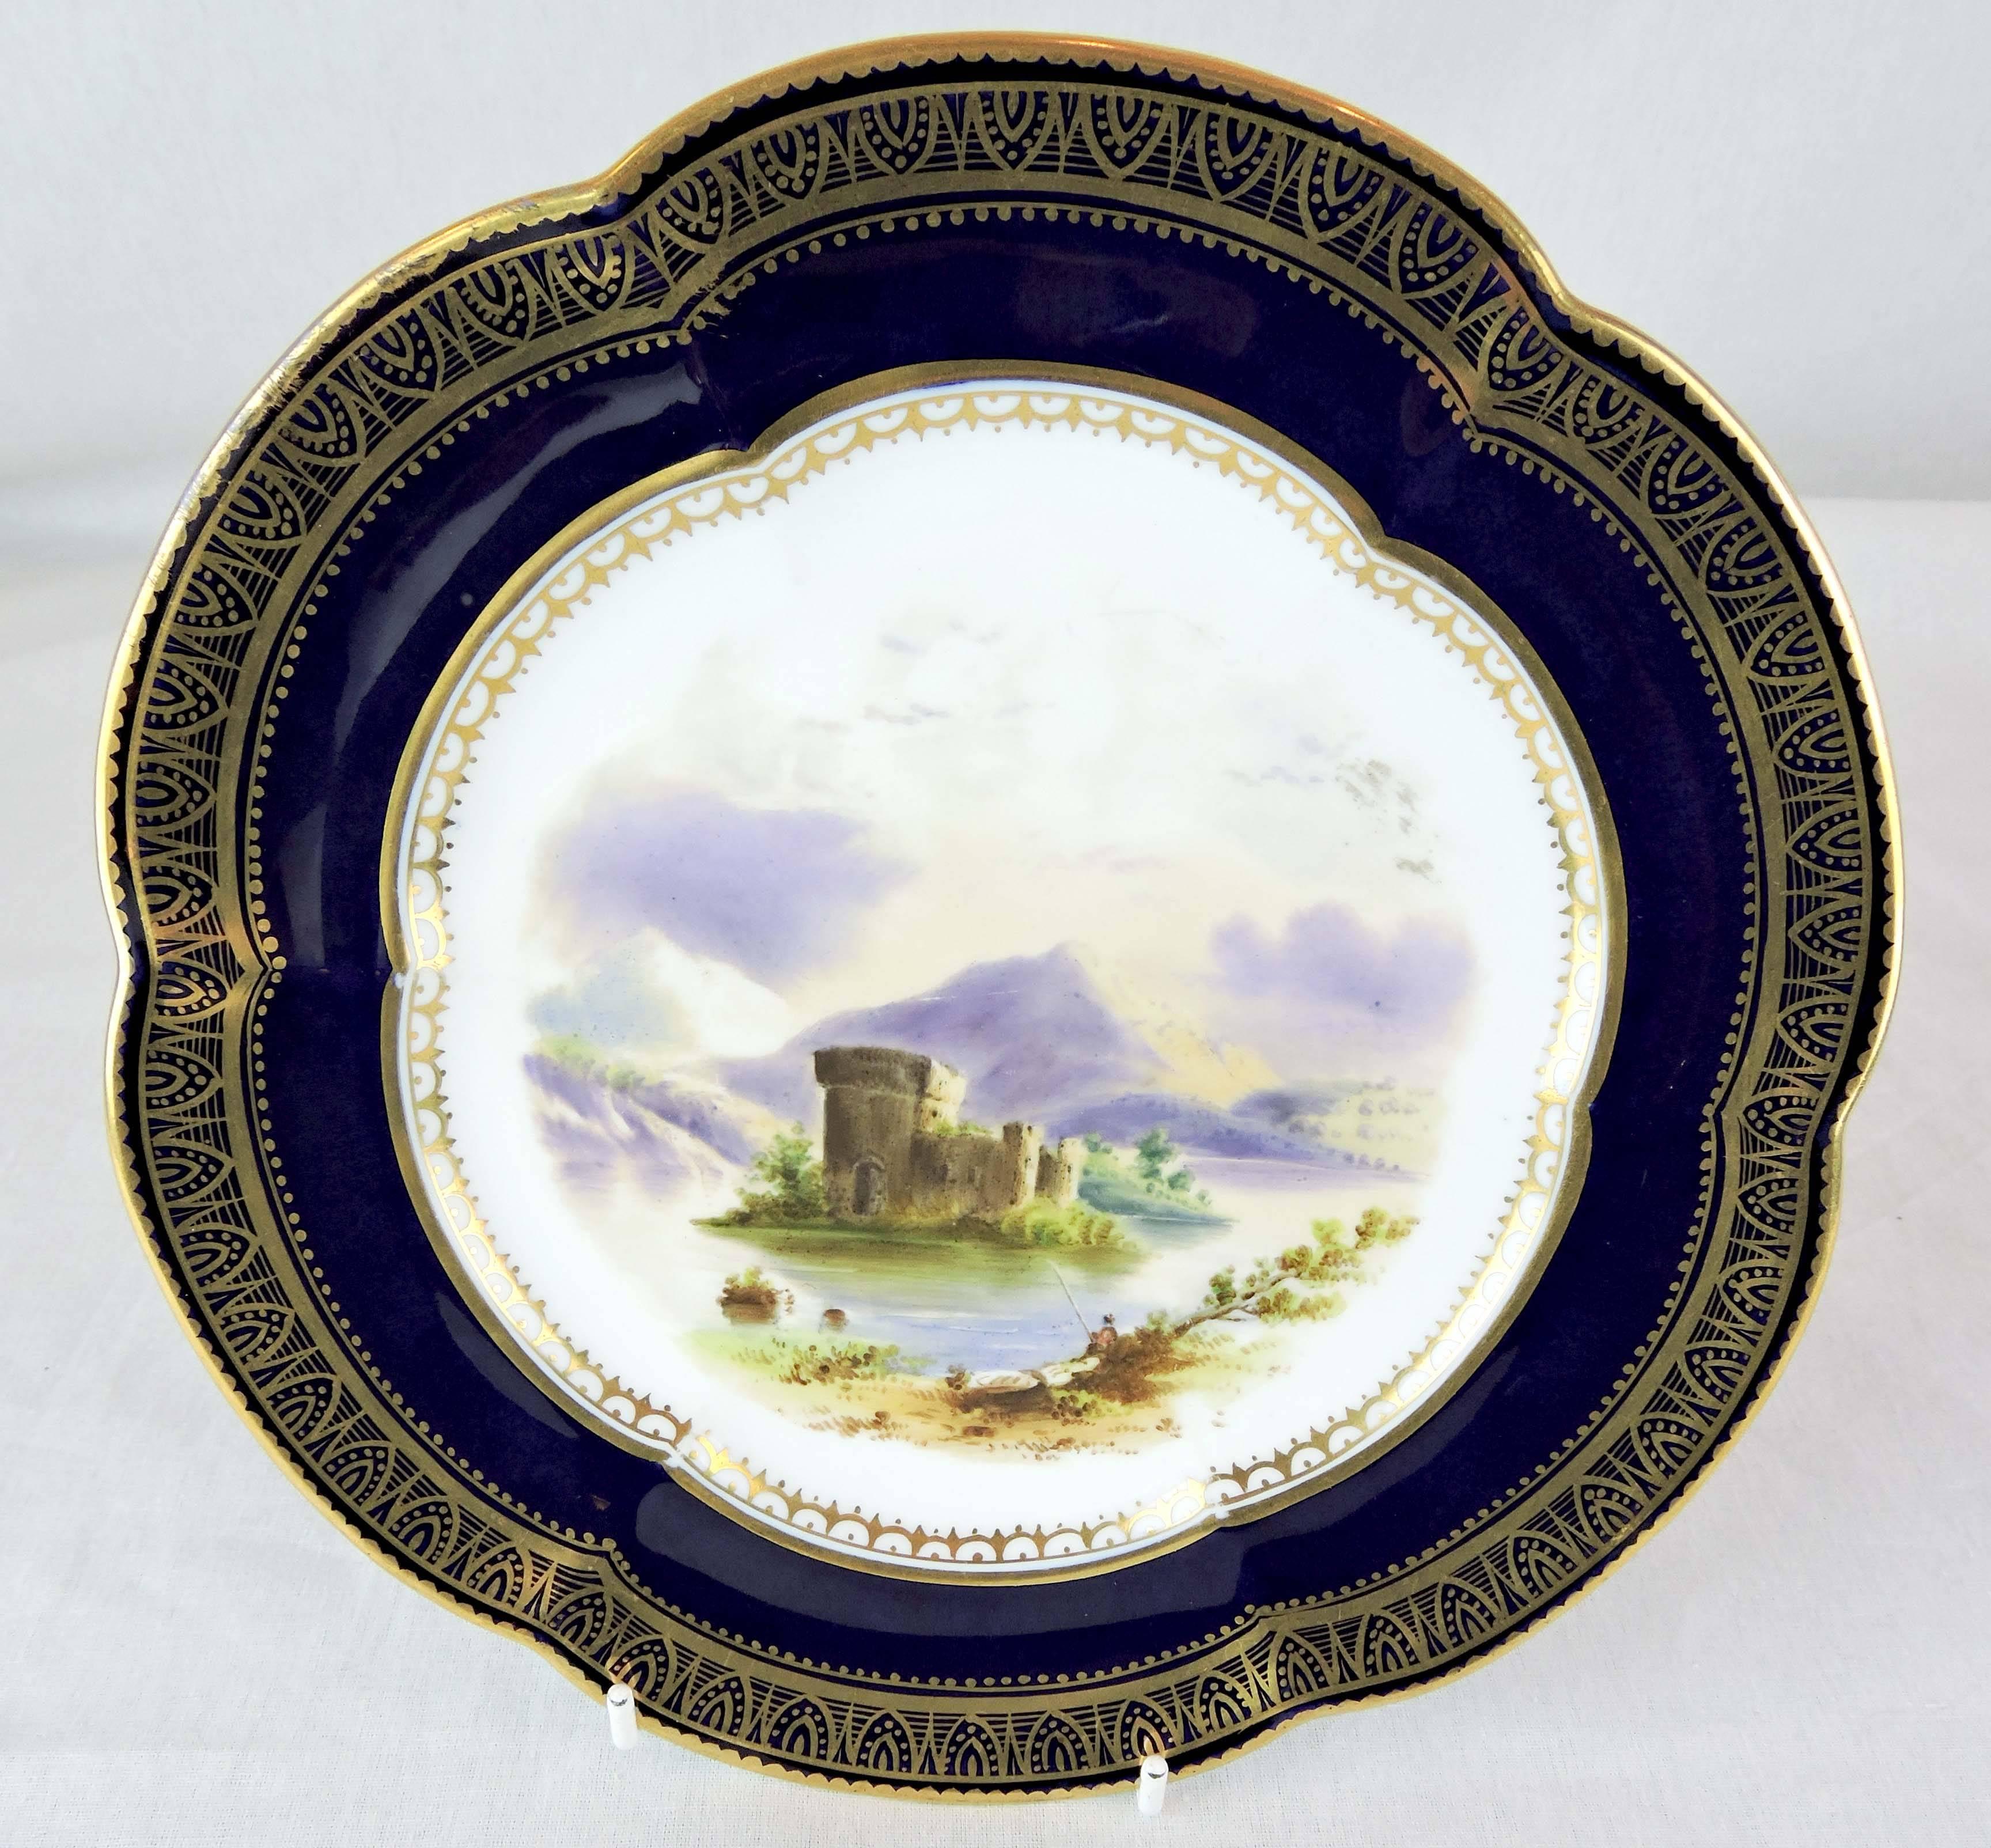 This is a pair of decorative porcelain plates by Spode, with scalloped, cobalt blue rims and hand-applied, architectural, gilt borders. Restrained, dentelle, gilt trim also frames the central paintings.

The plates depict two different vistas: